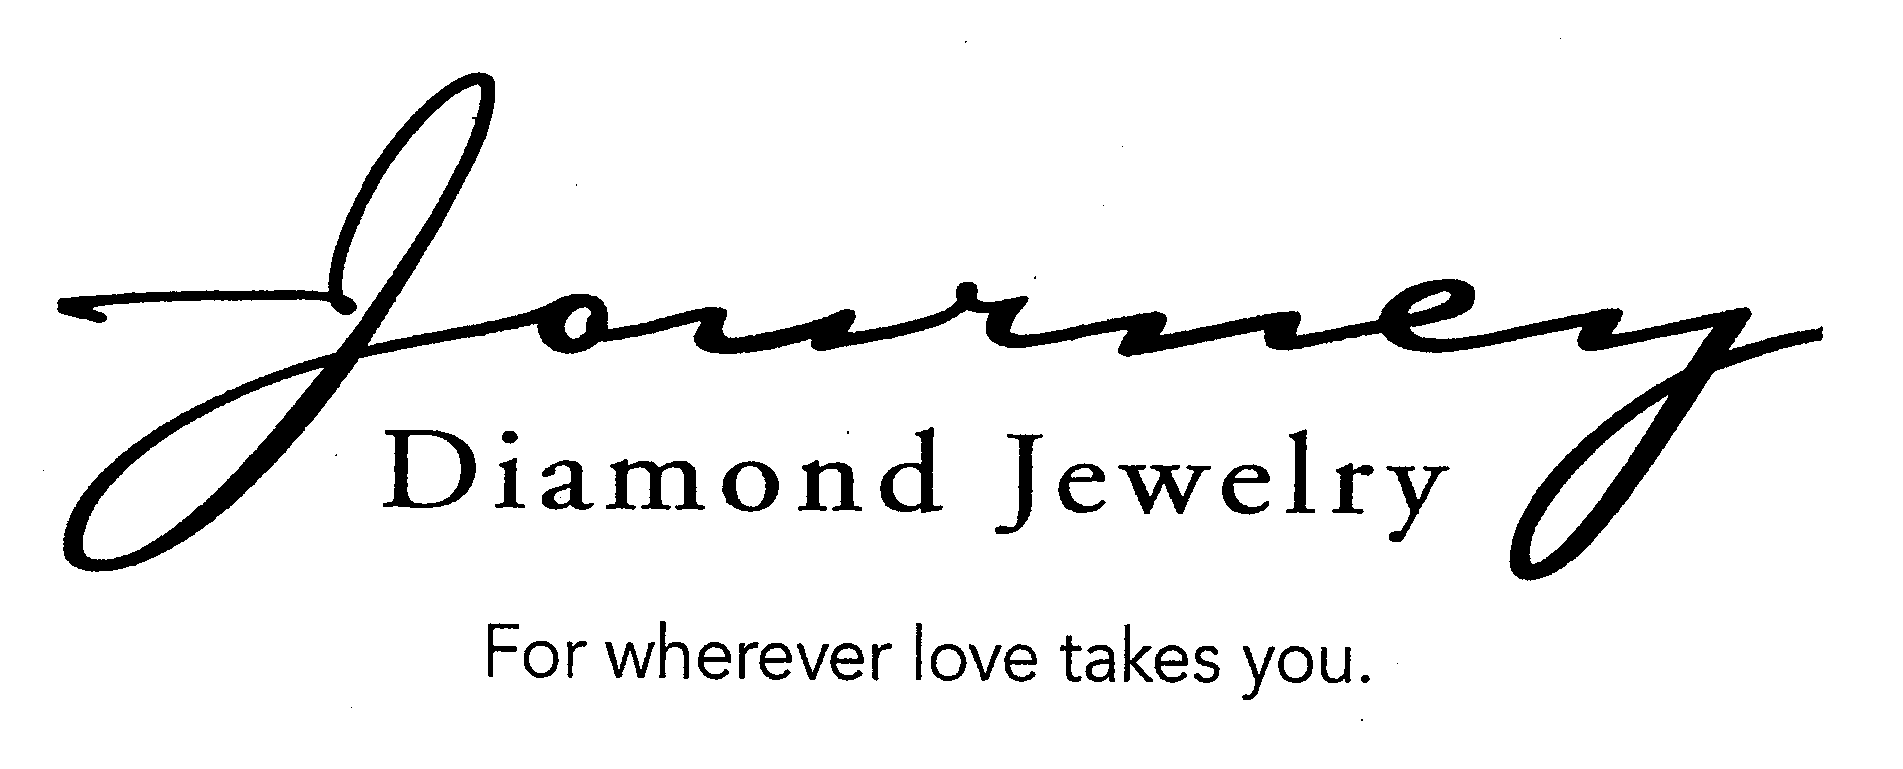  JOURNEY DIAMOND JEWELRY FOR WHEREVER LOVE TAKES YOU.